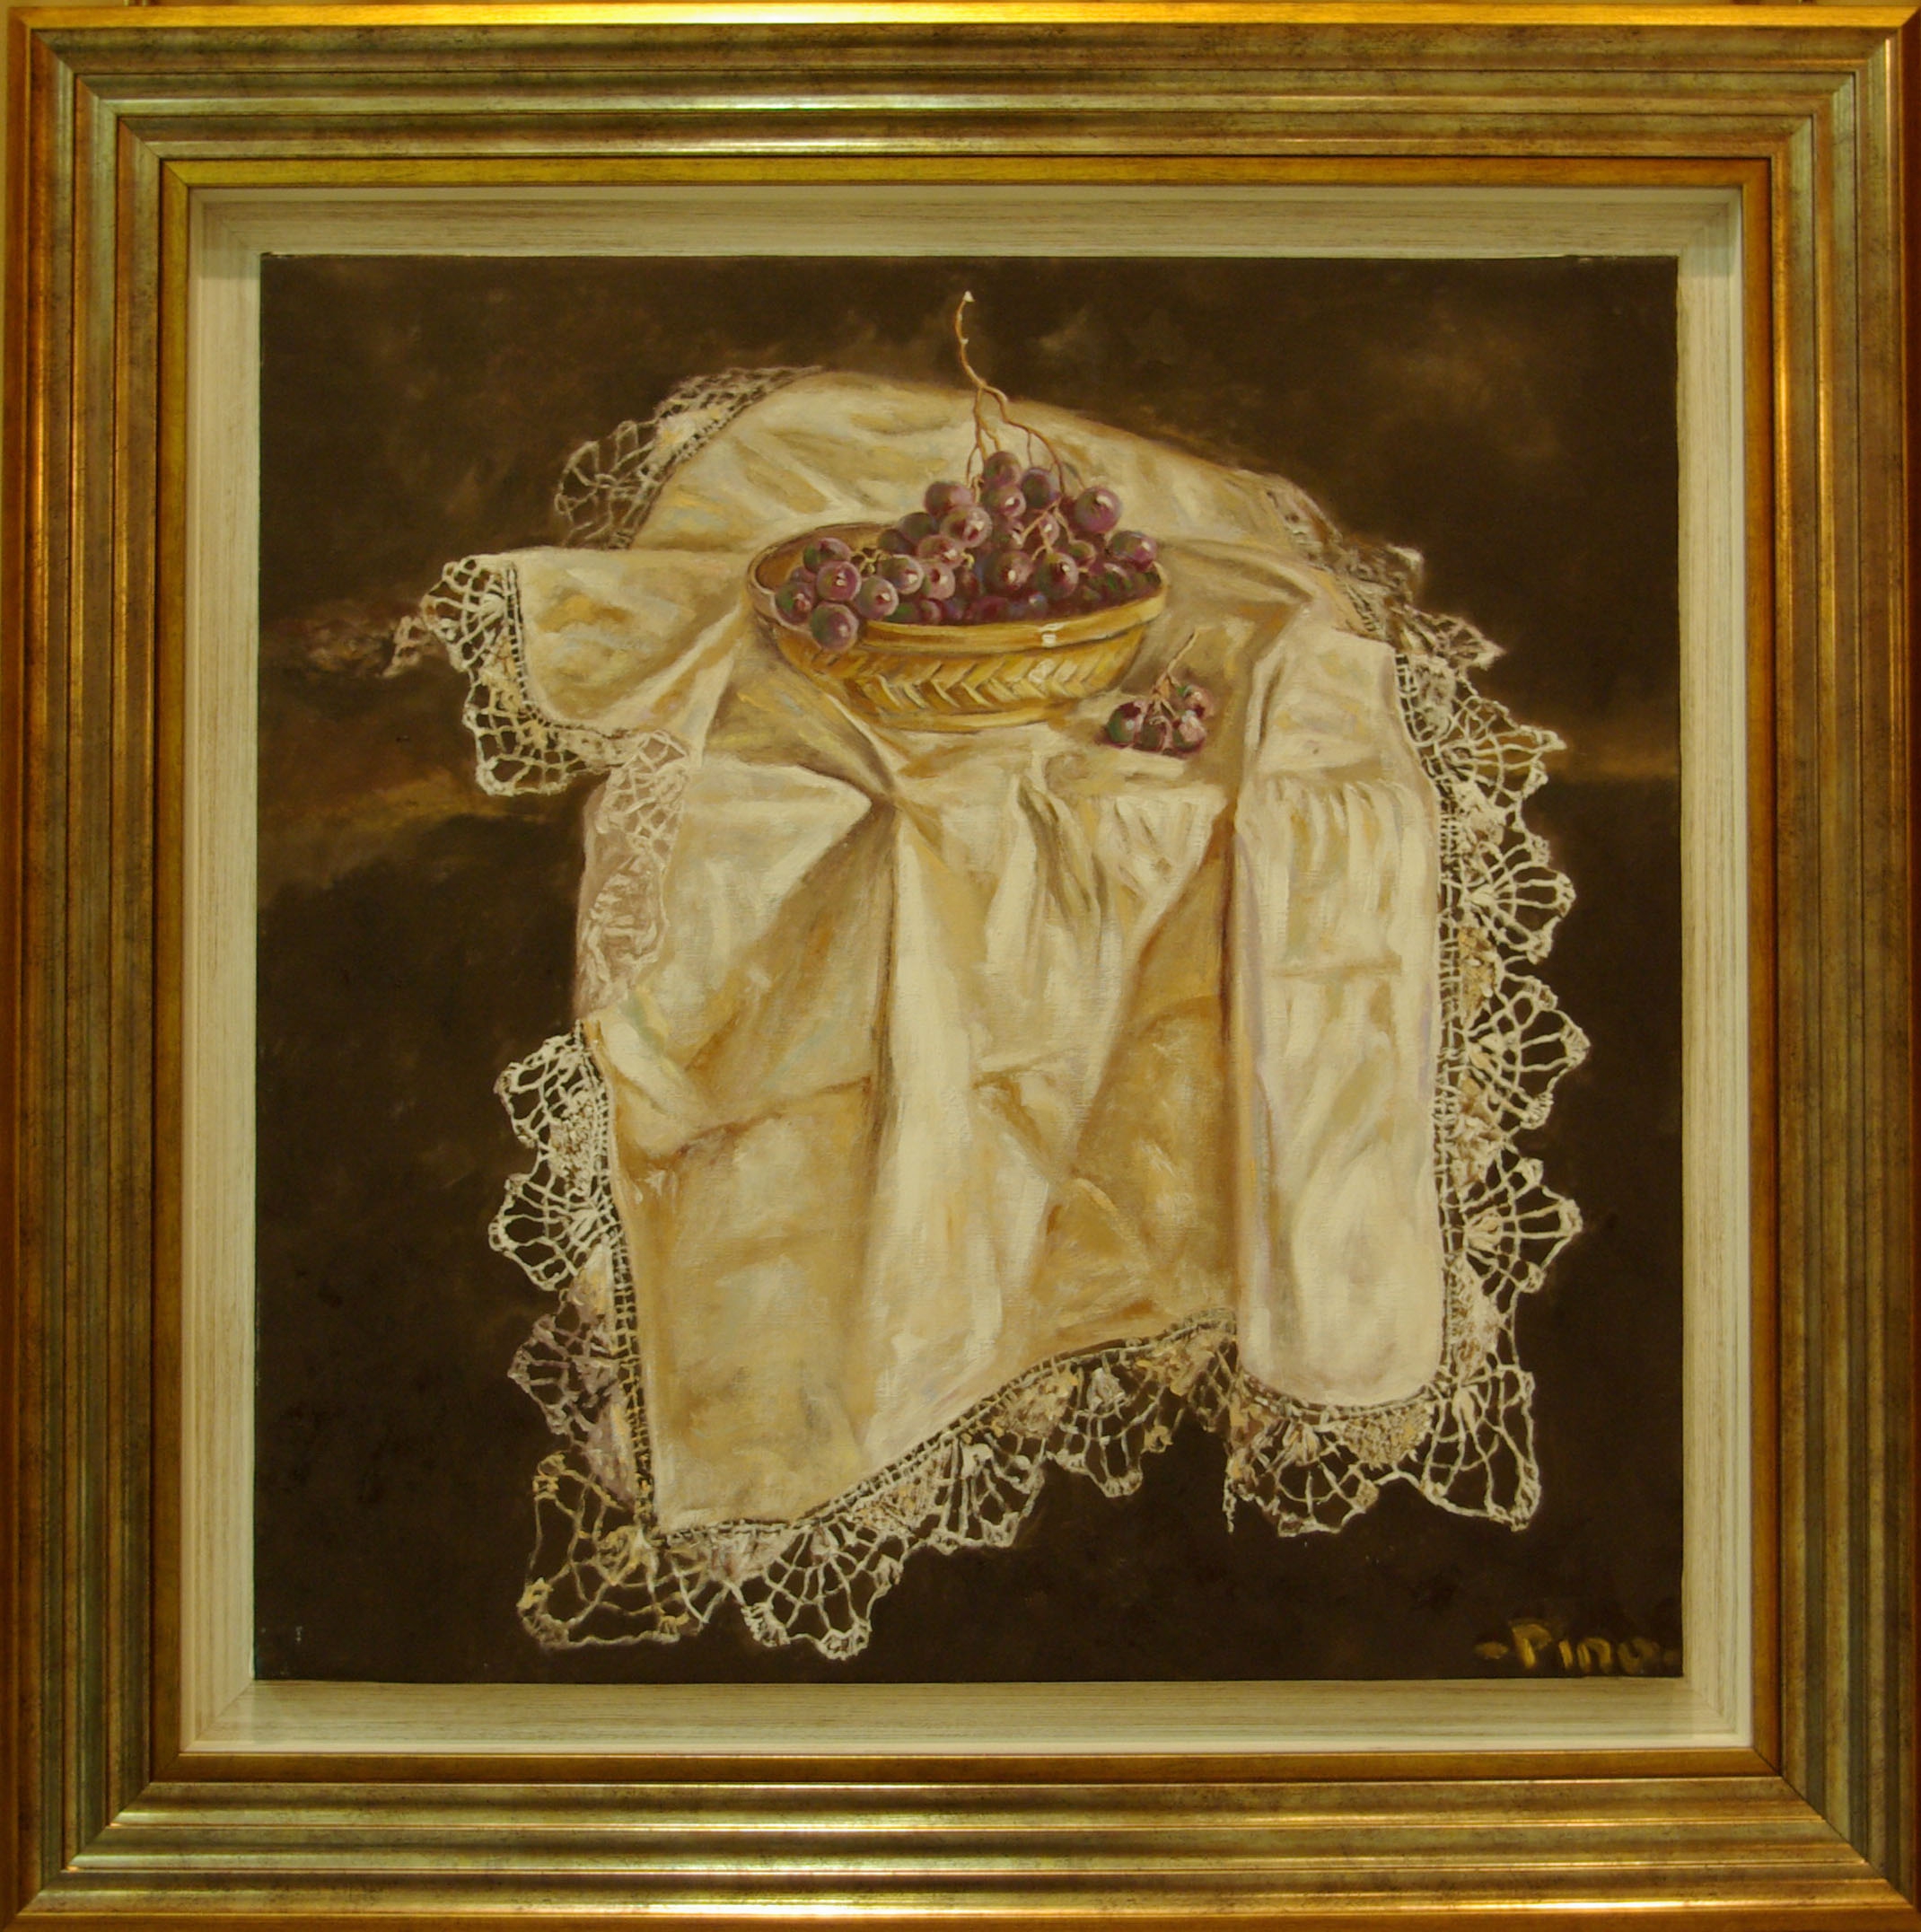 Cloth with grapes